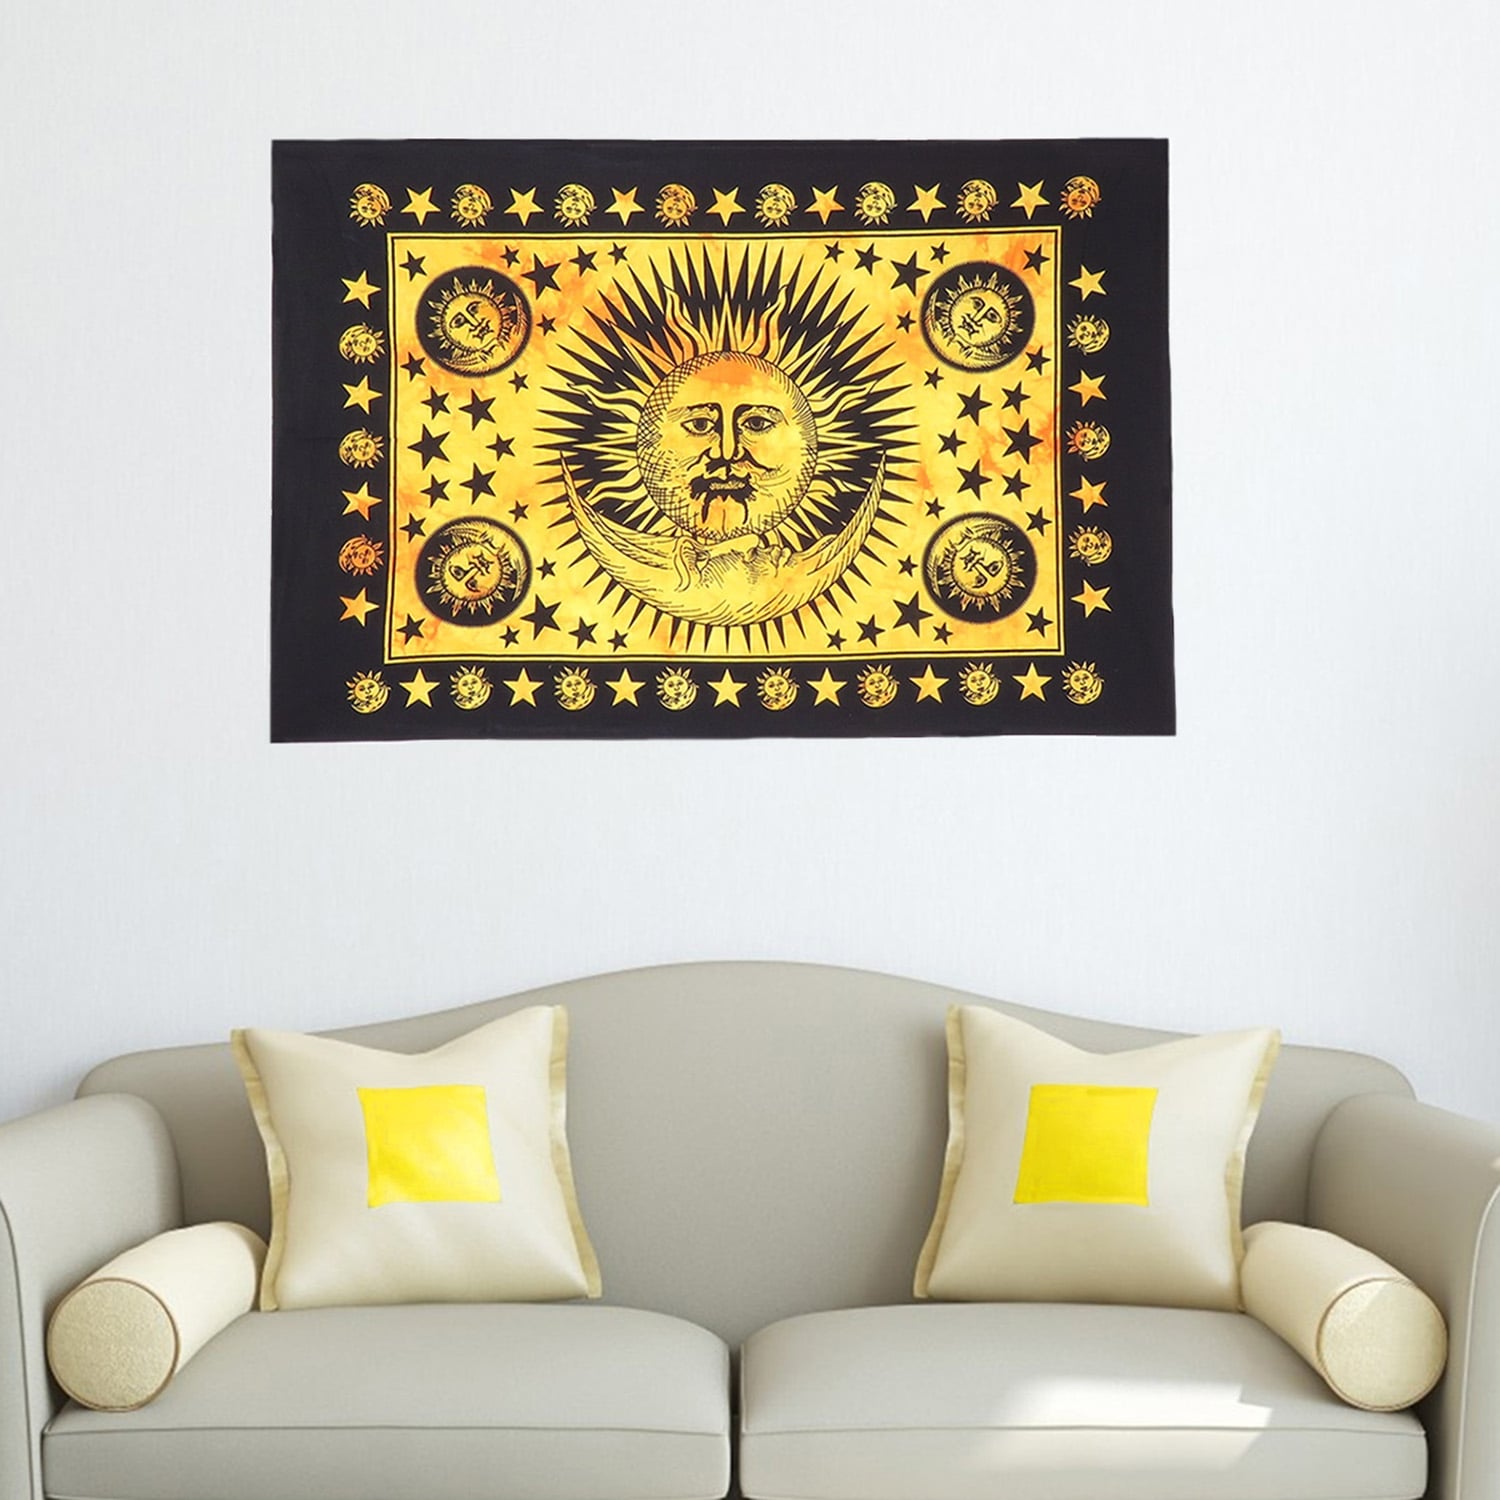 Yellow Color Wall Hanging Wonderful Design Small Tapestry Poster Cotton Fabric 